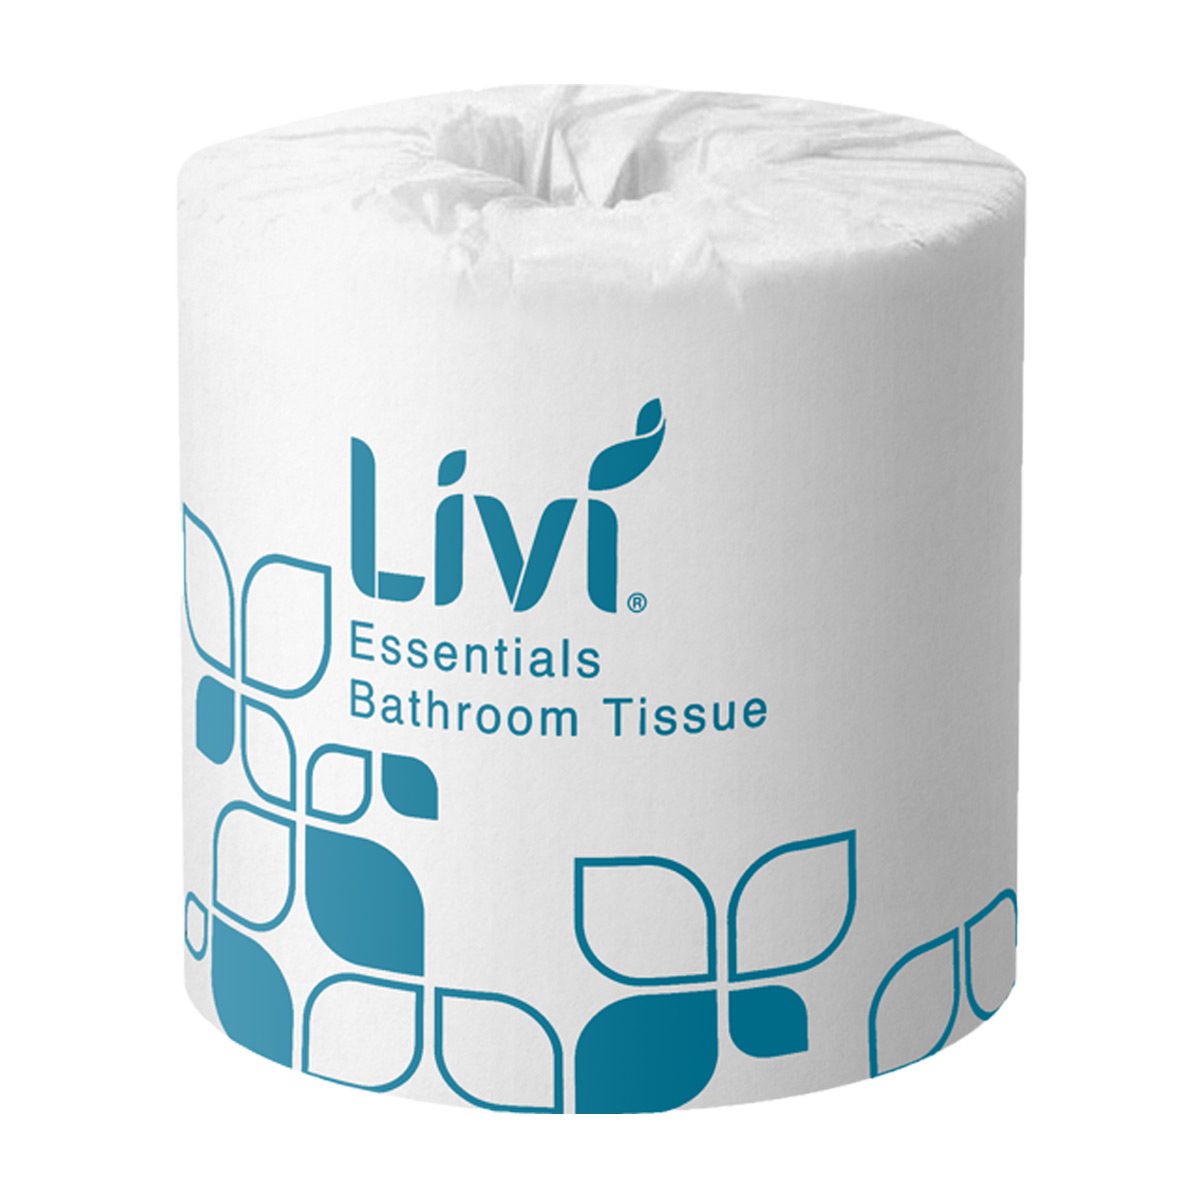 paper-products-toilet-paper-livi-essentials-400-sheets-x-48-rolls-2ply-individually-wrapped-hygiene-strong-absorbent-tissue-reliable-embossed-gentle-and-soft-touch-vjs-distributors-1001